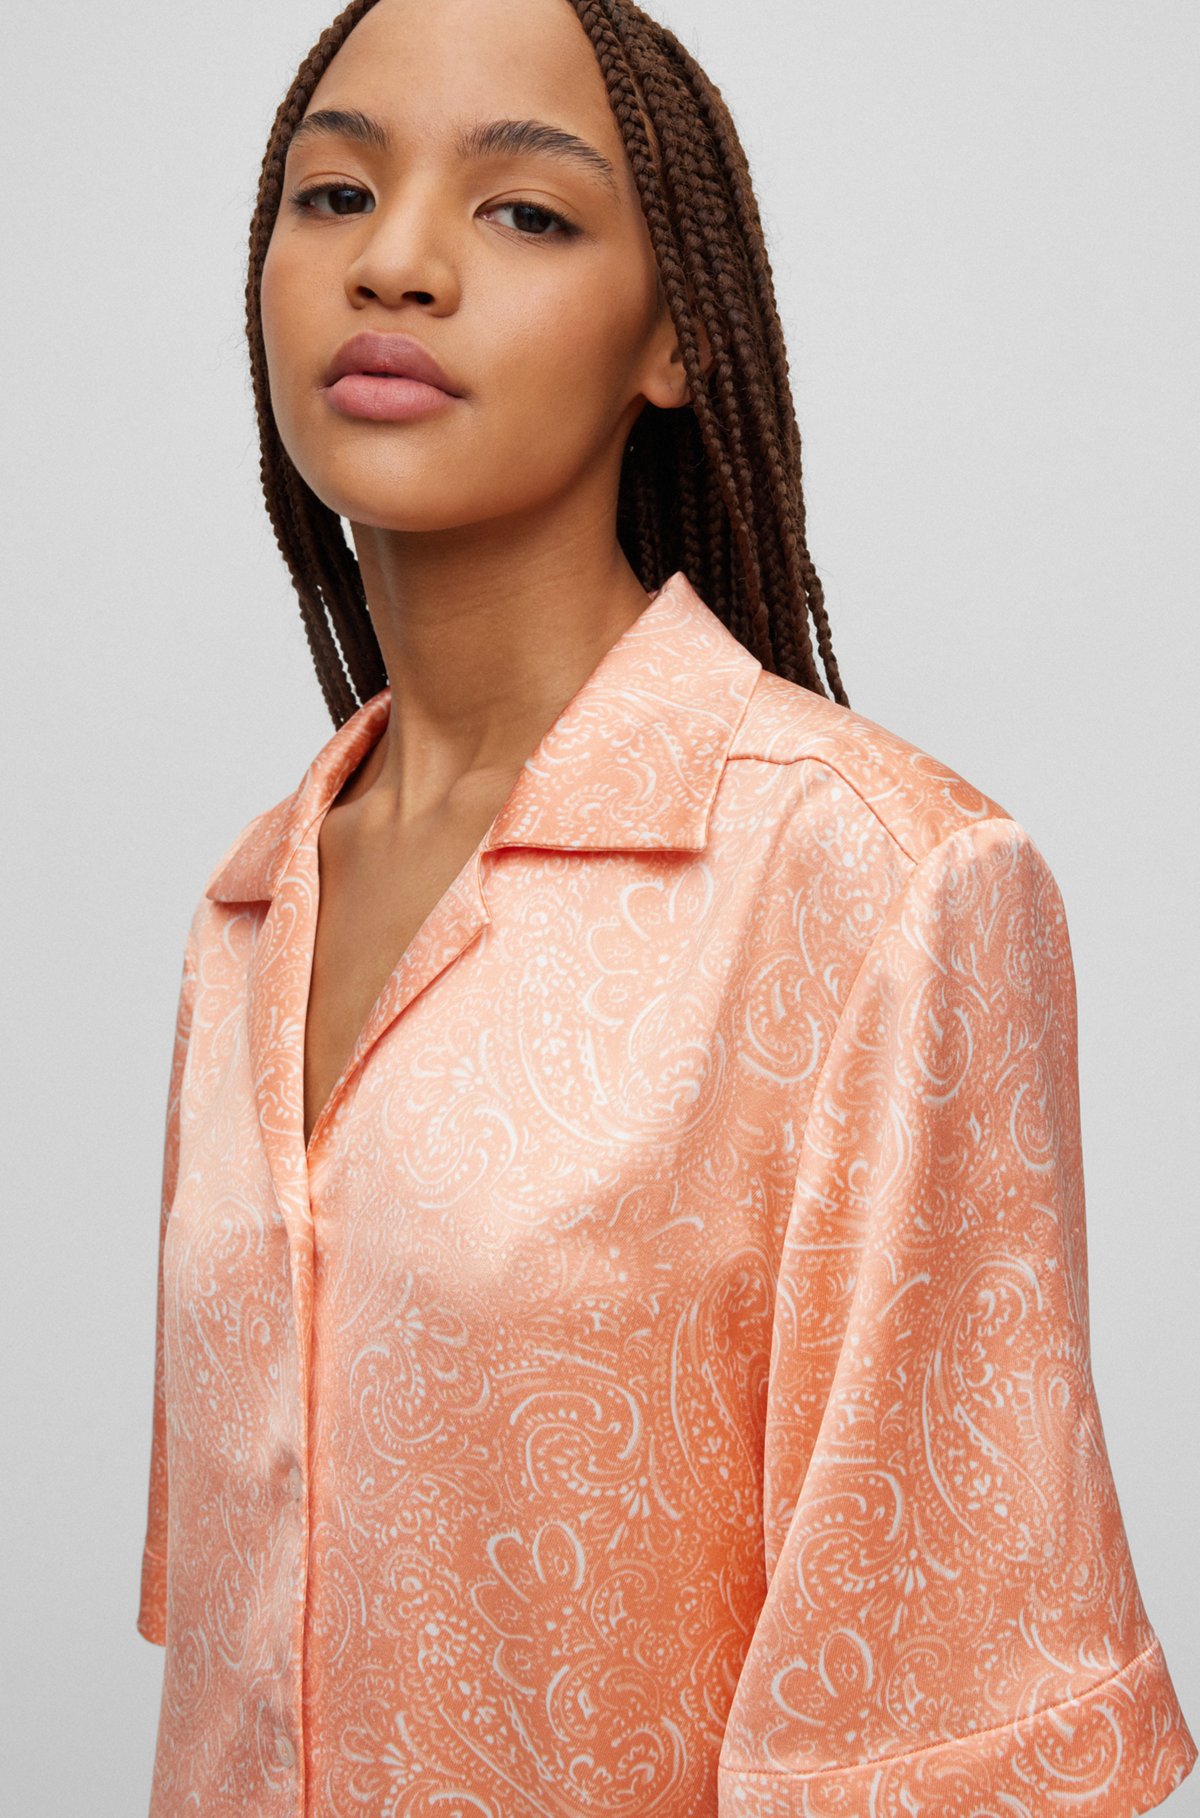 Relaxed-fit short-sleeved blouse in paisley-print satin, Patterned